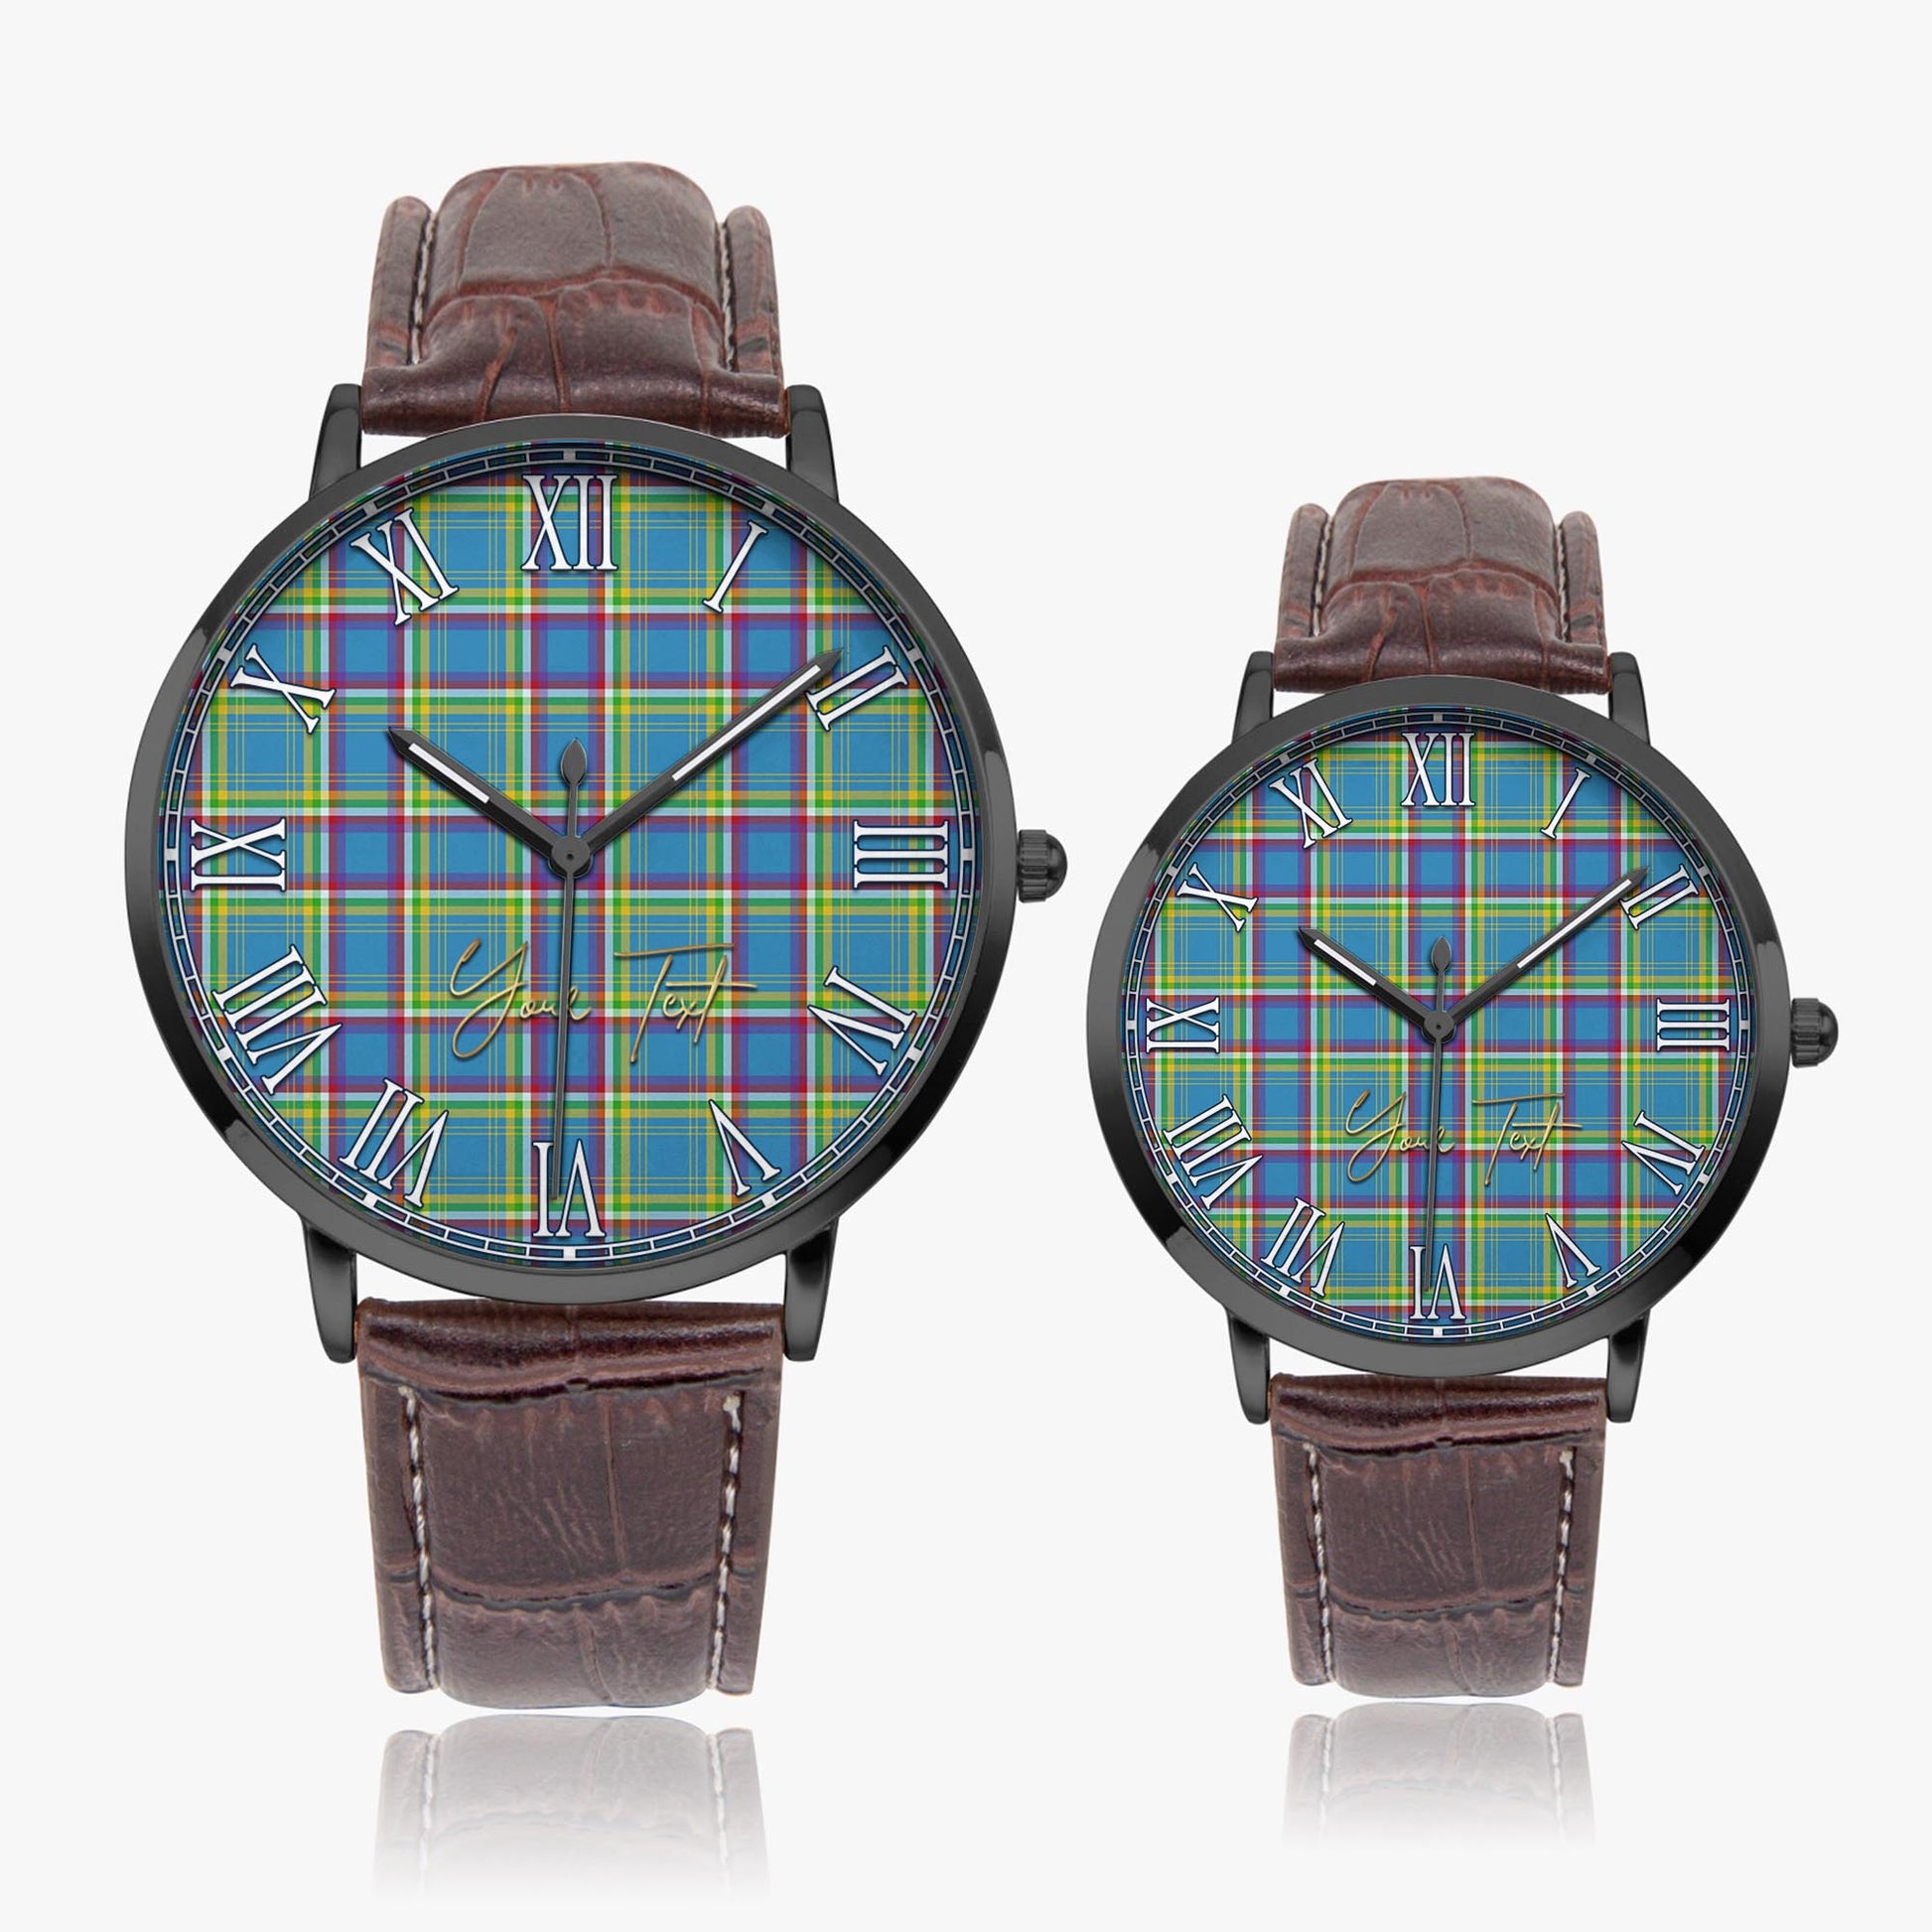 Yukon Territory Canada Tartan Personalized Your Text Leather Trap Quartz Watch Ultra Thin Black Case With Brown Leather Strap - Tartanvibesclothing Shop